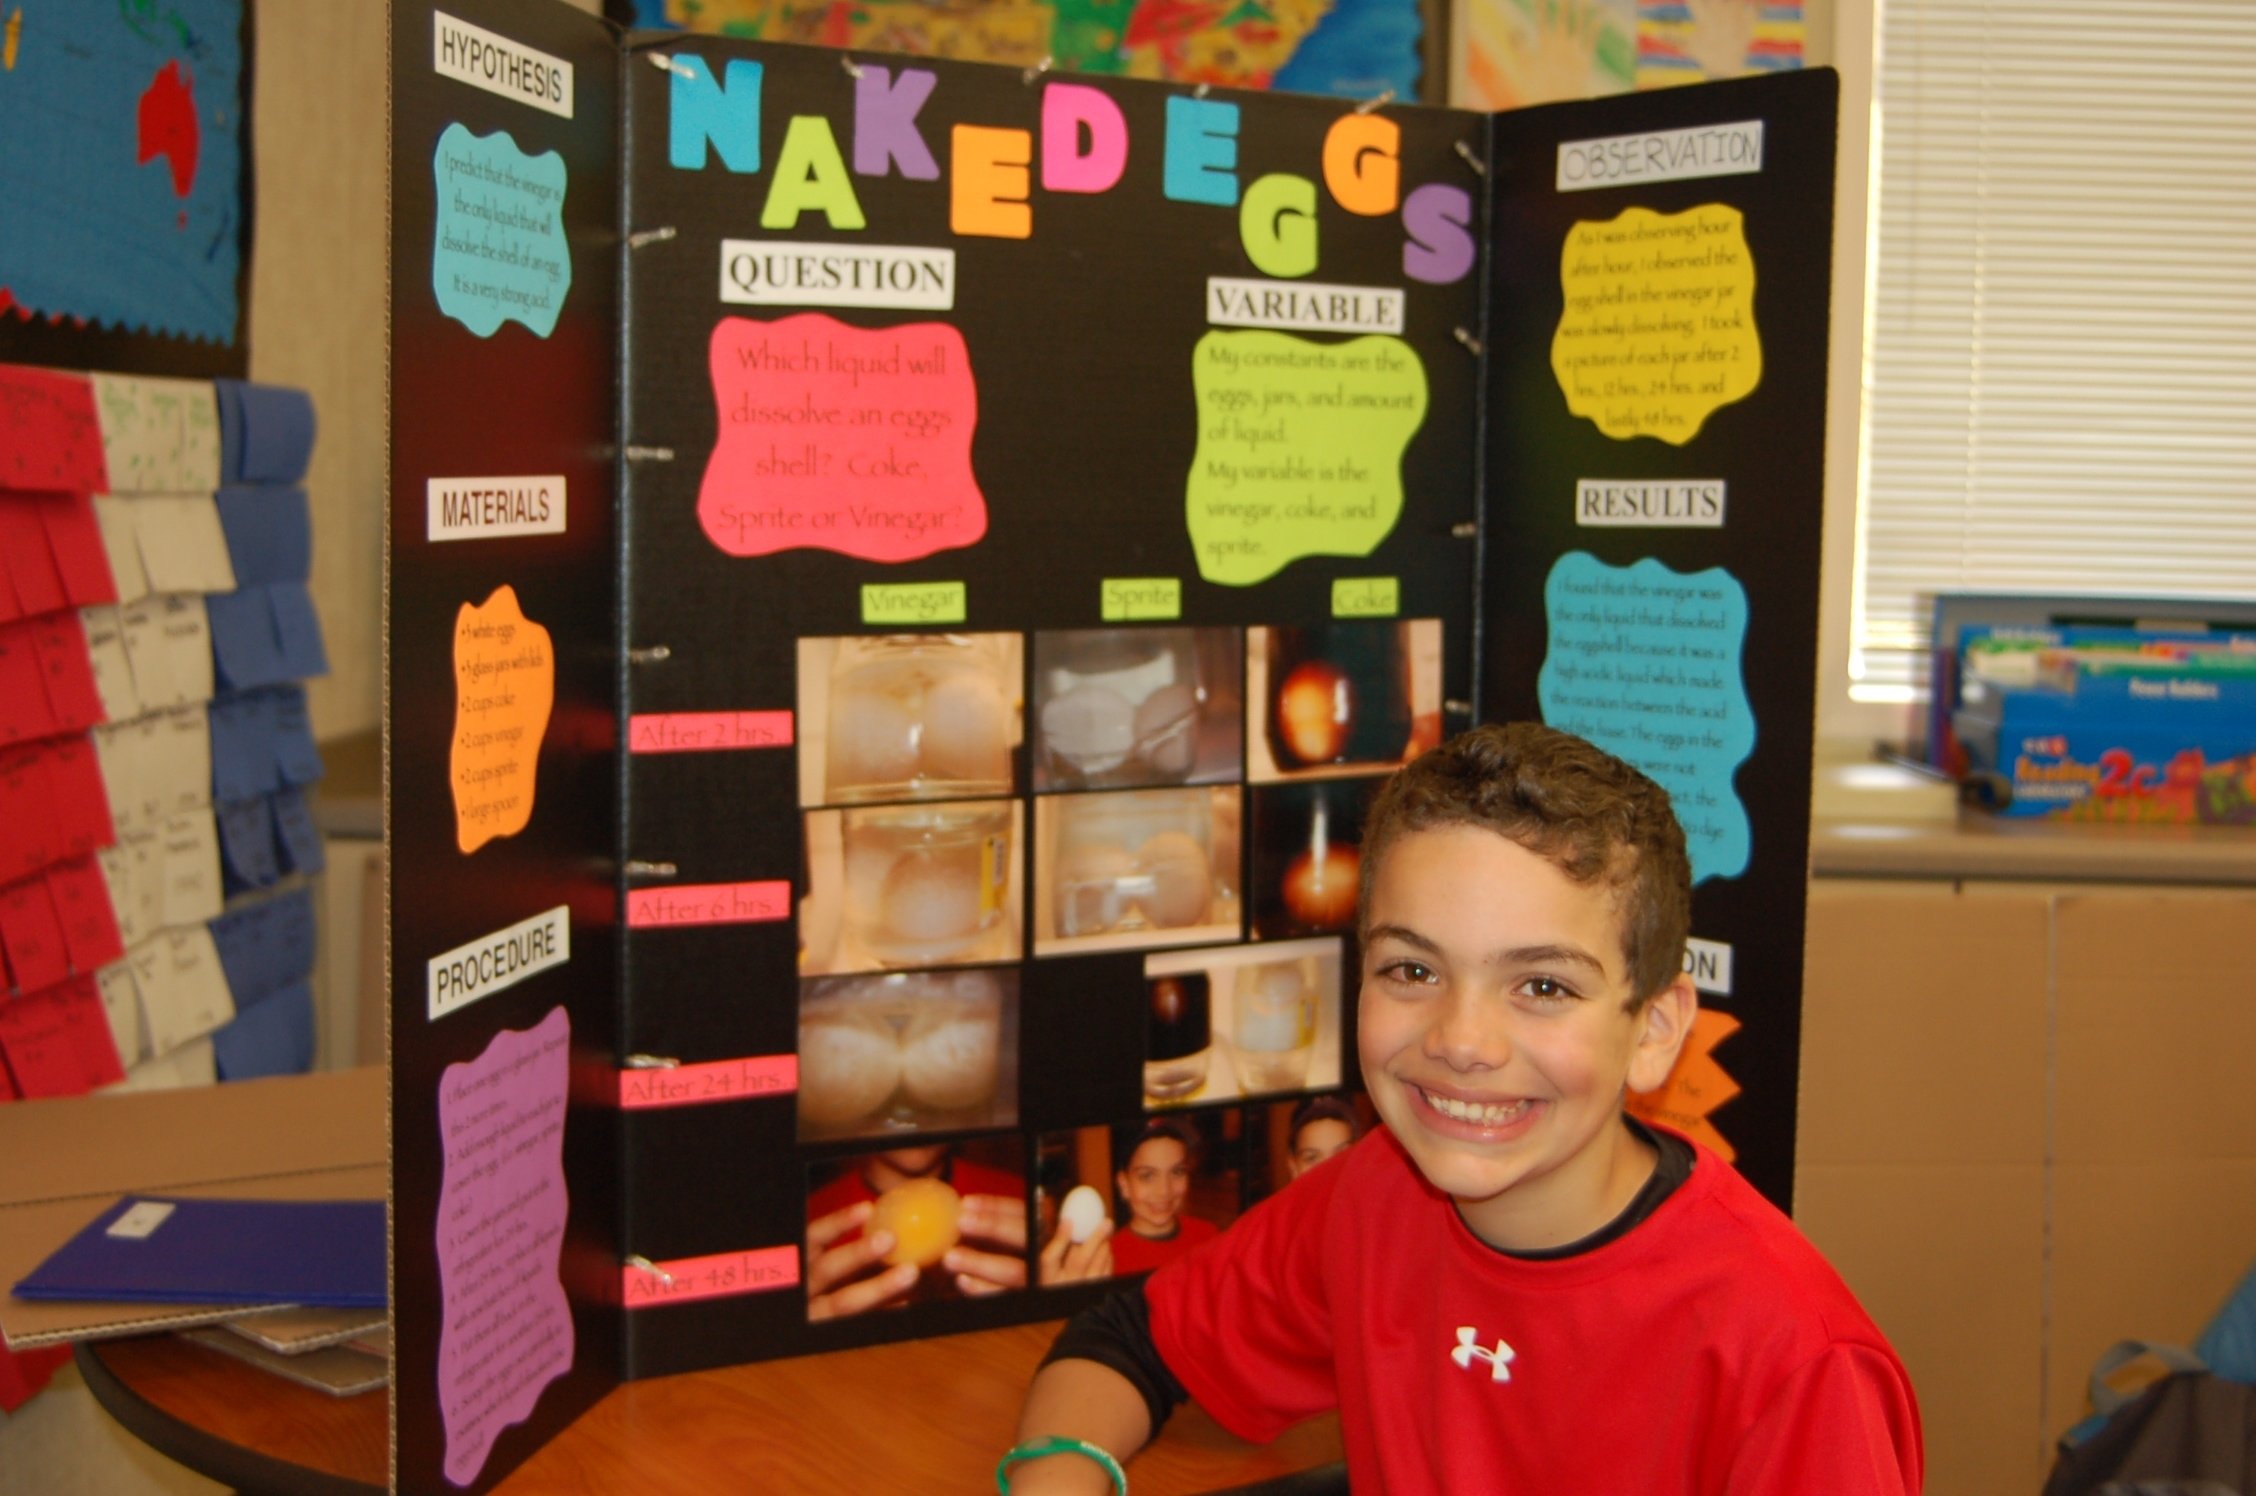 10 Great Middle School Science Project Ideas green elementary school science fair inspires student scientists 12 2022